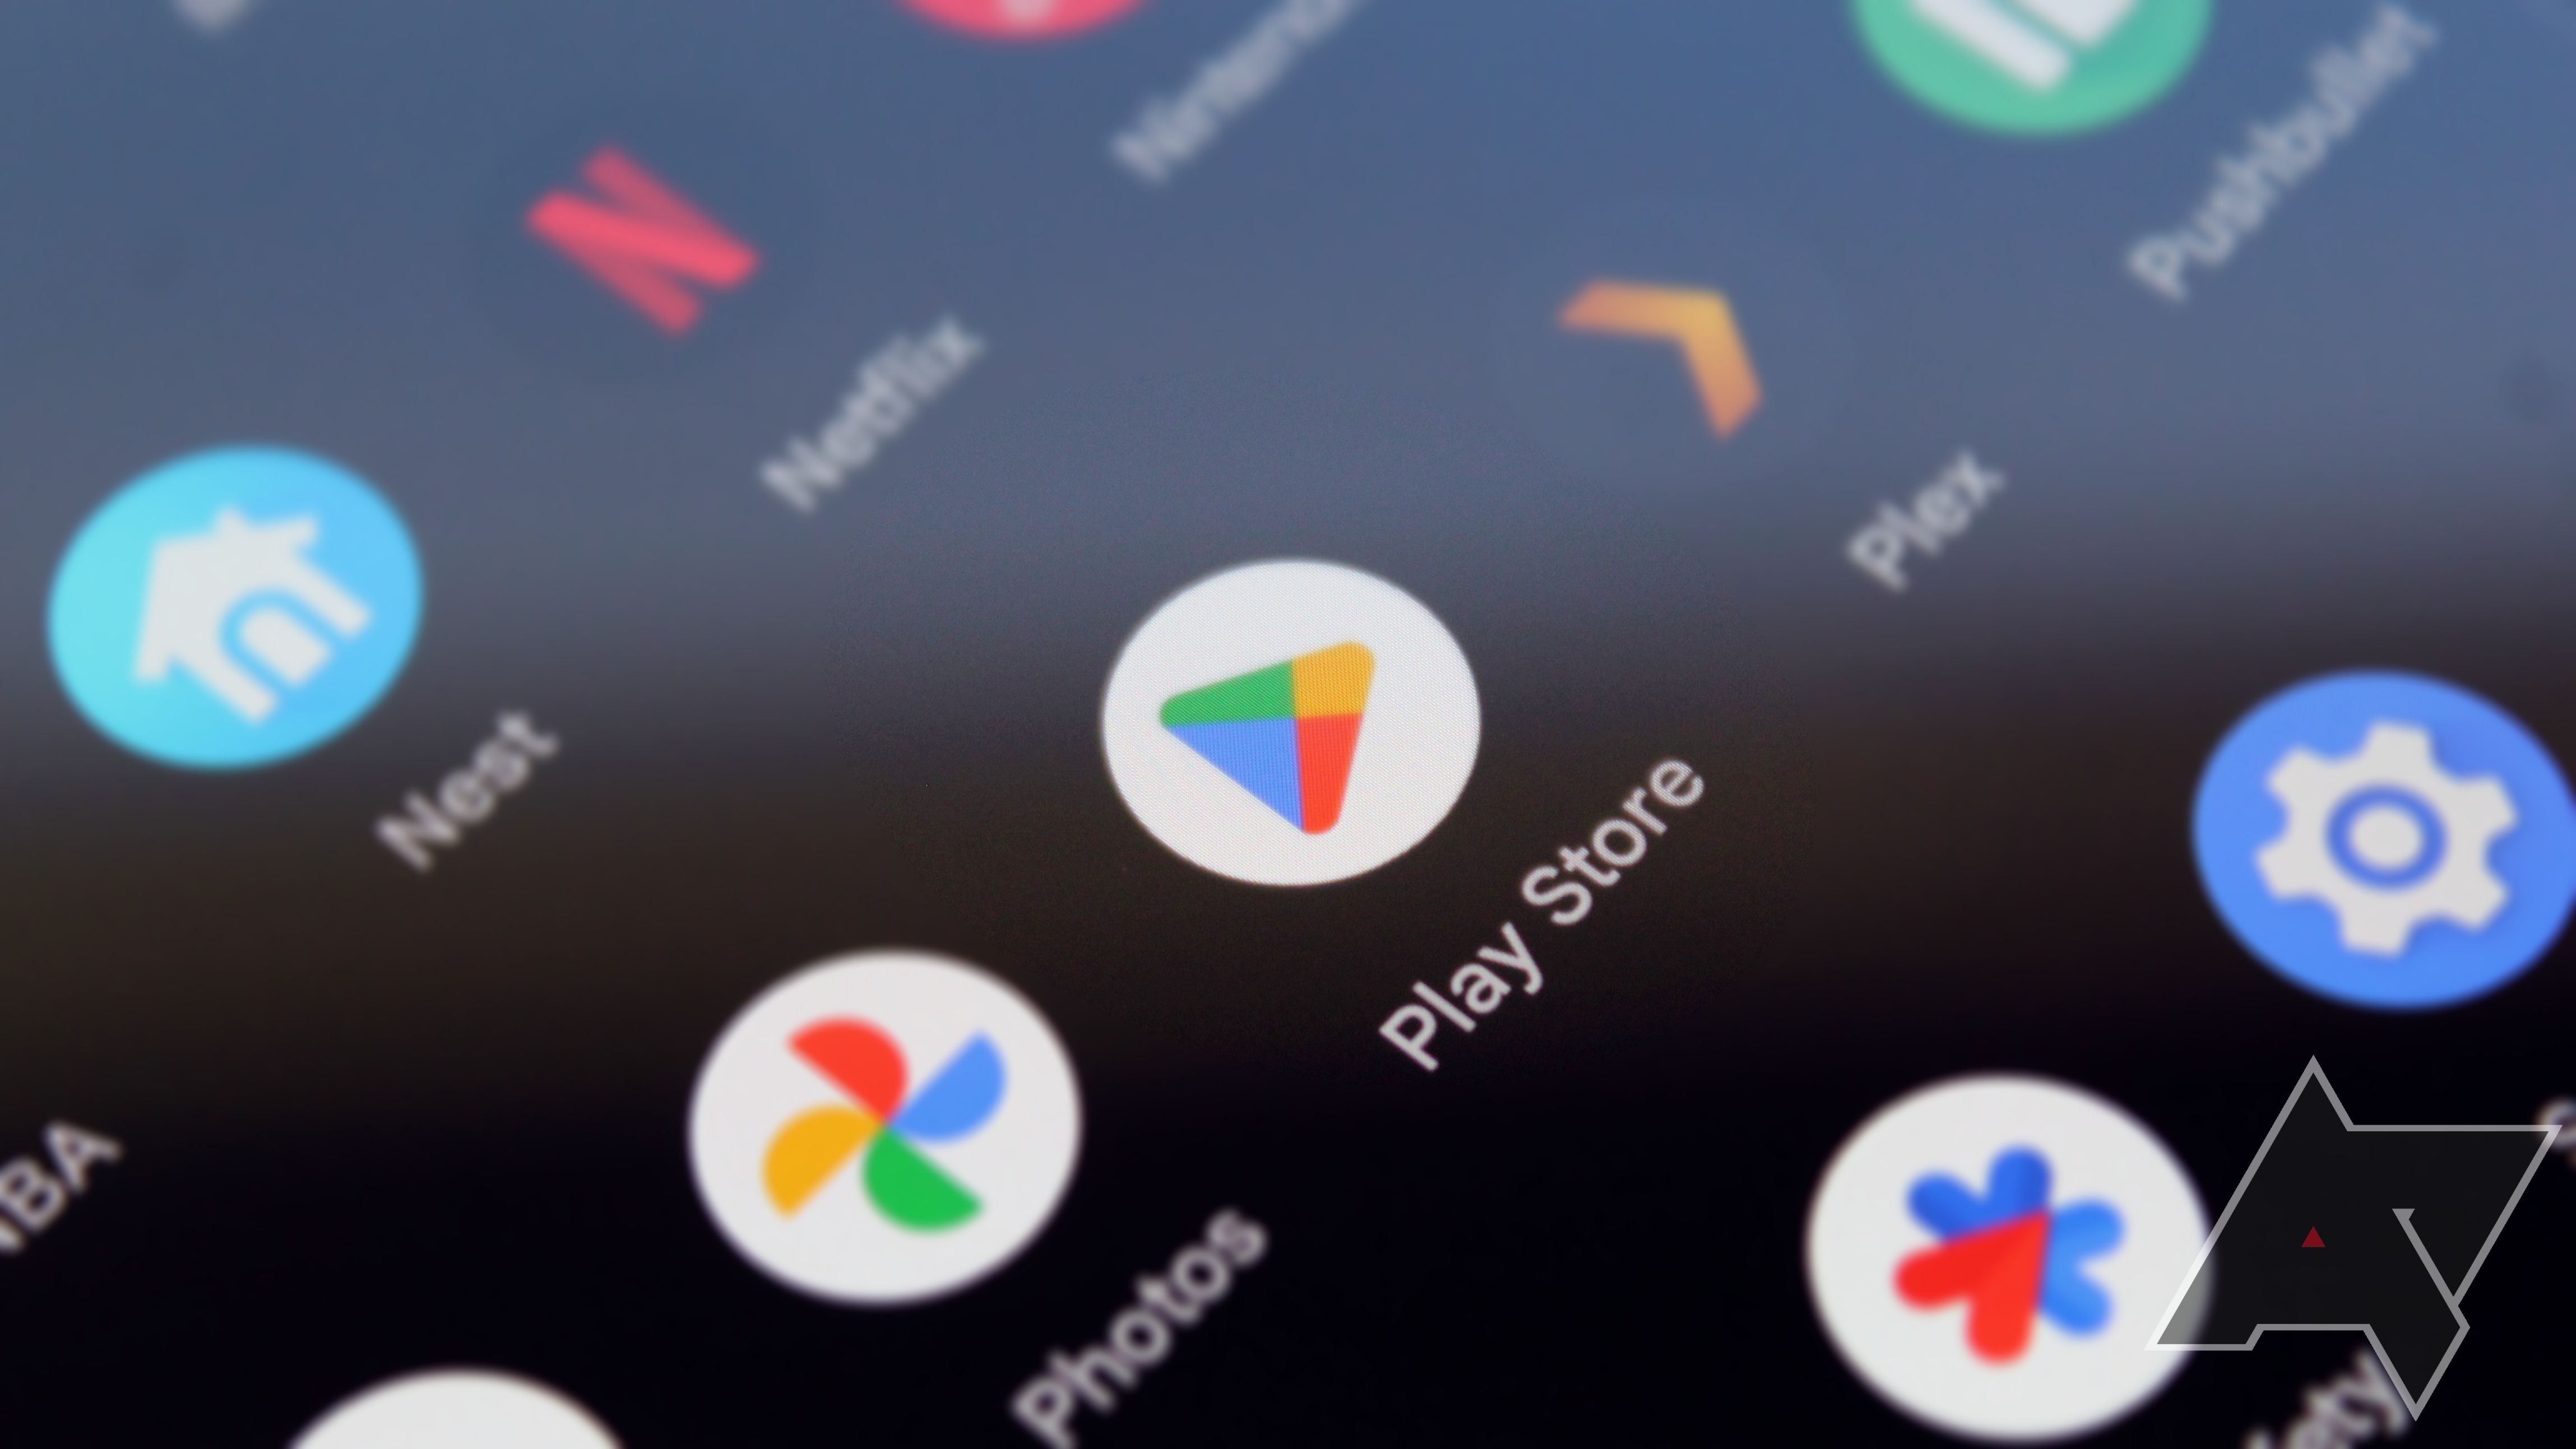 Unable to download apps from Play Store? Here are 10 things you can try